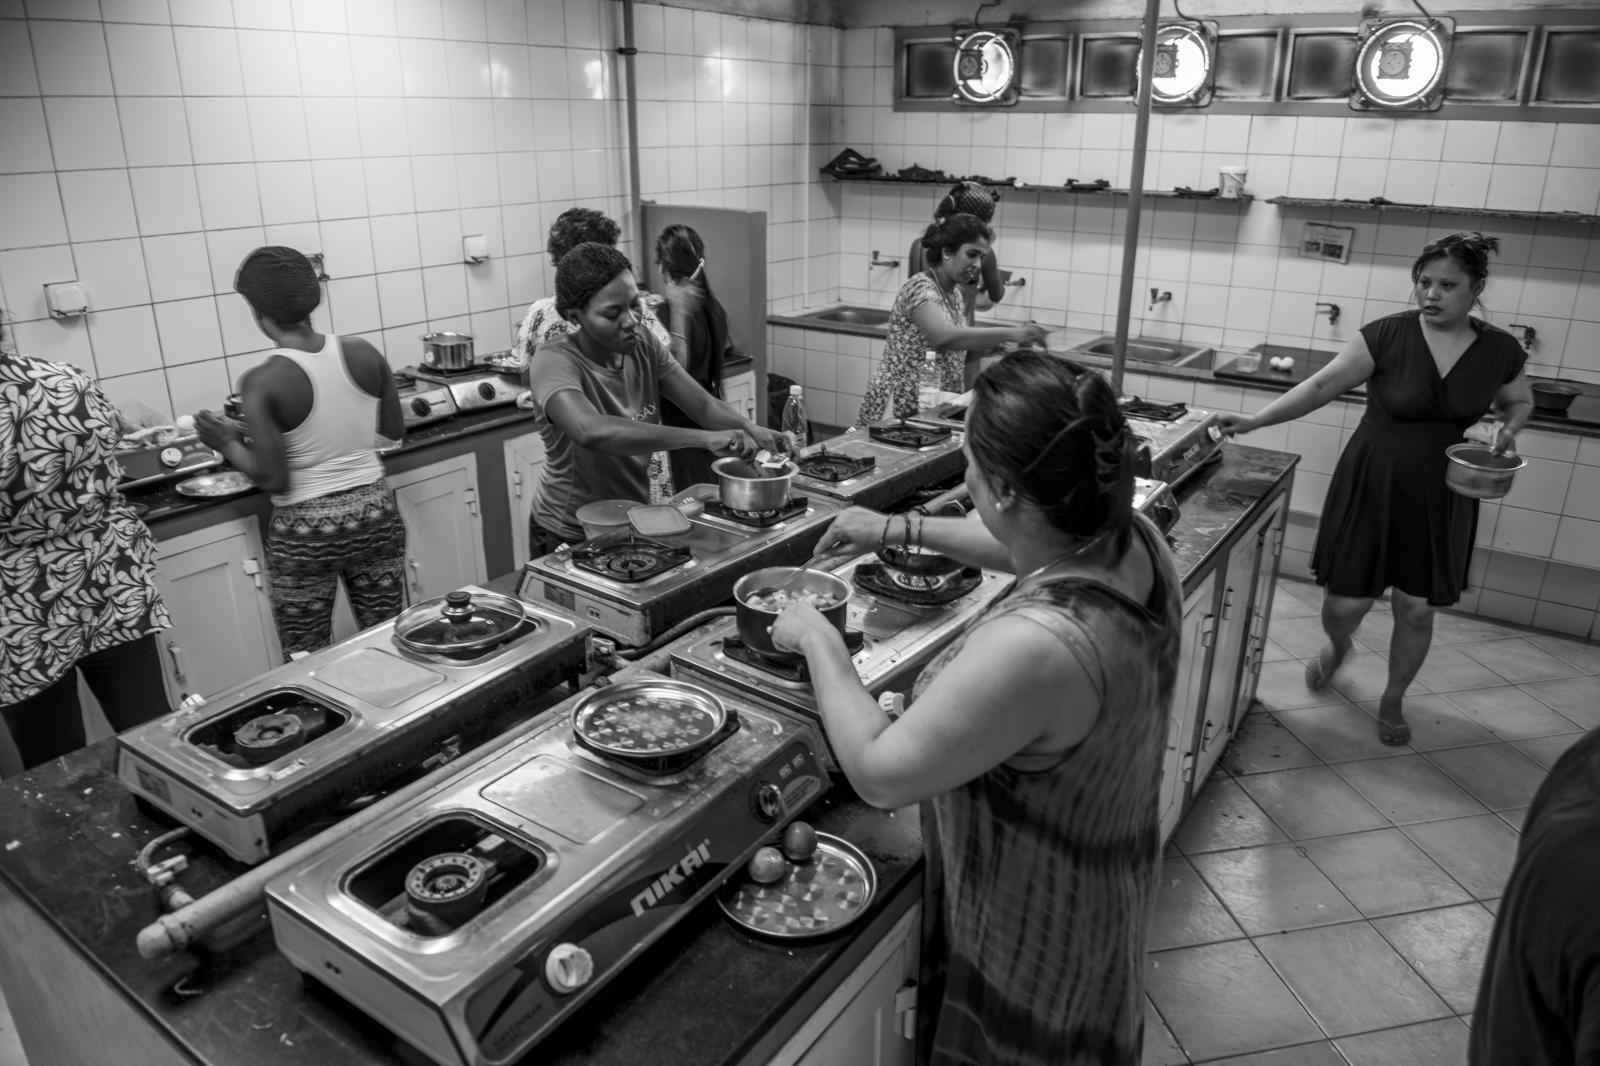 Sri Lankan Economic Crisis: Women Domestic Workers Migrate to the UAE - Ongoing